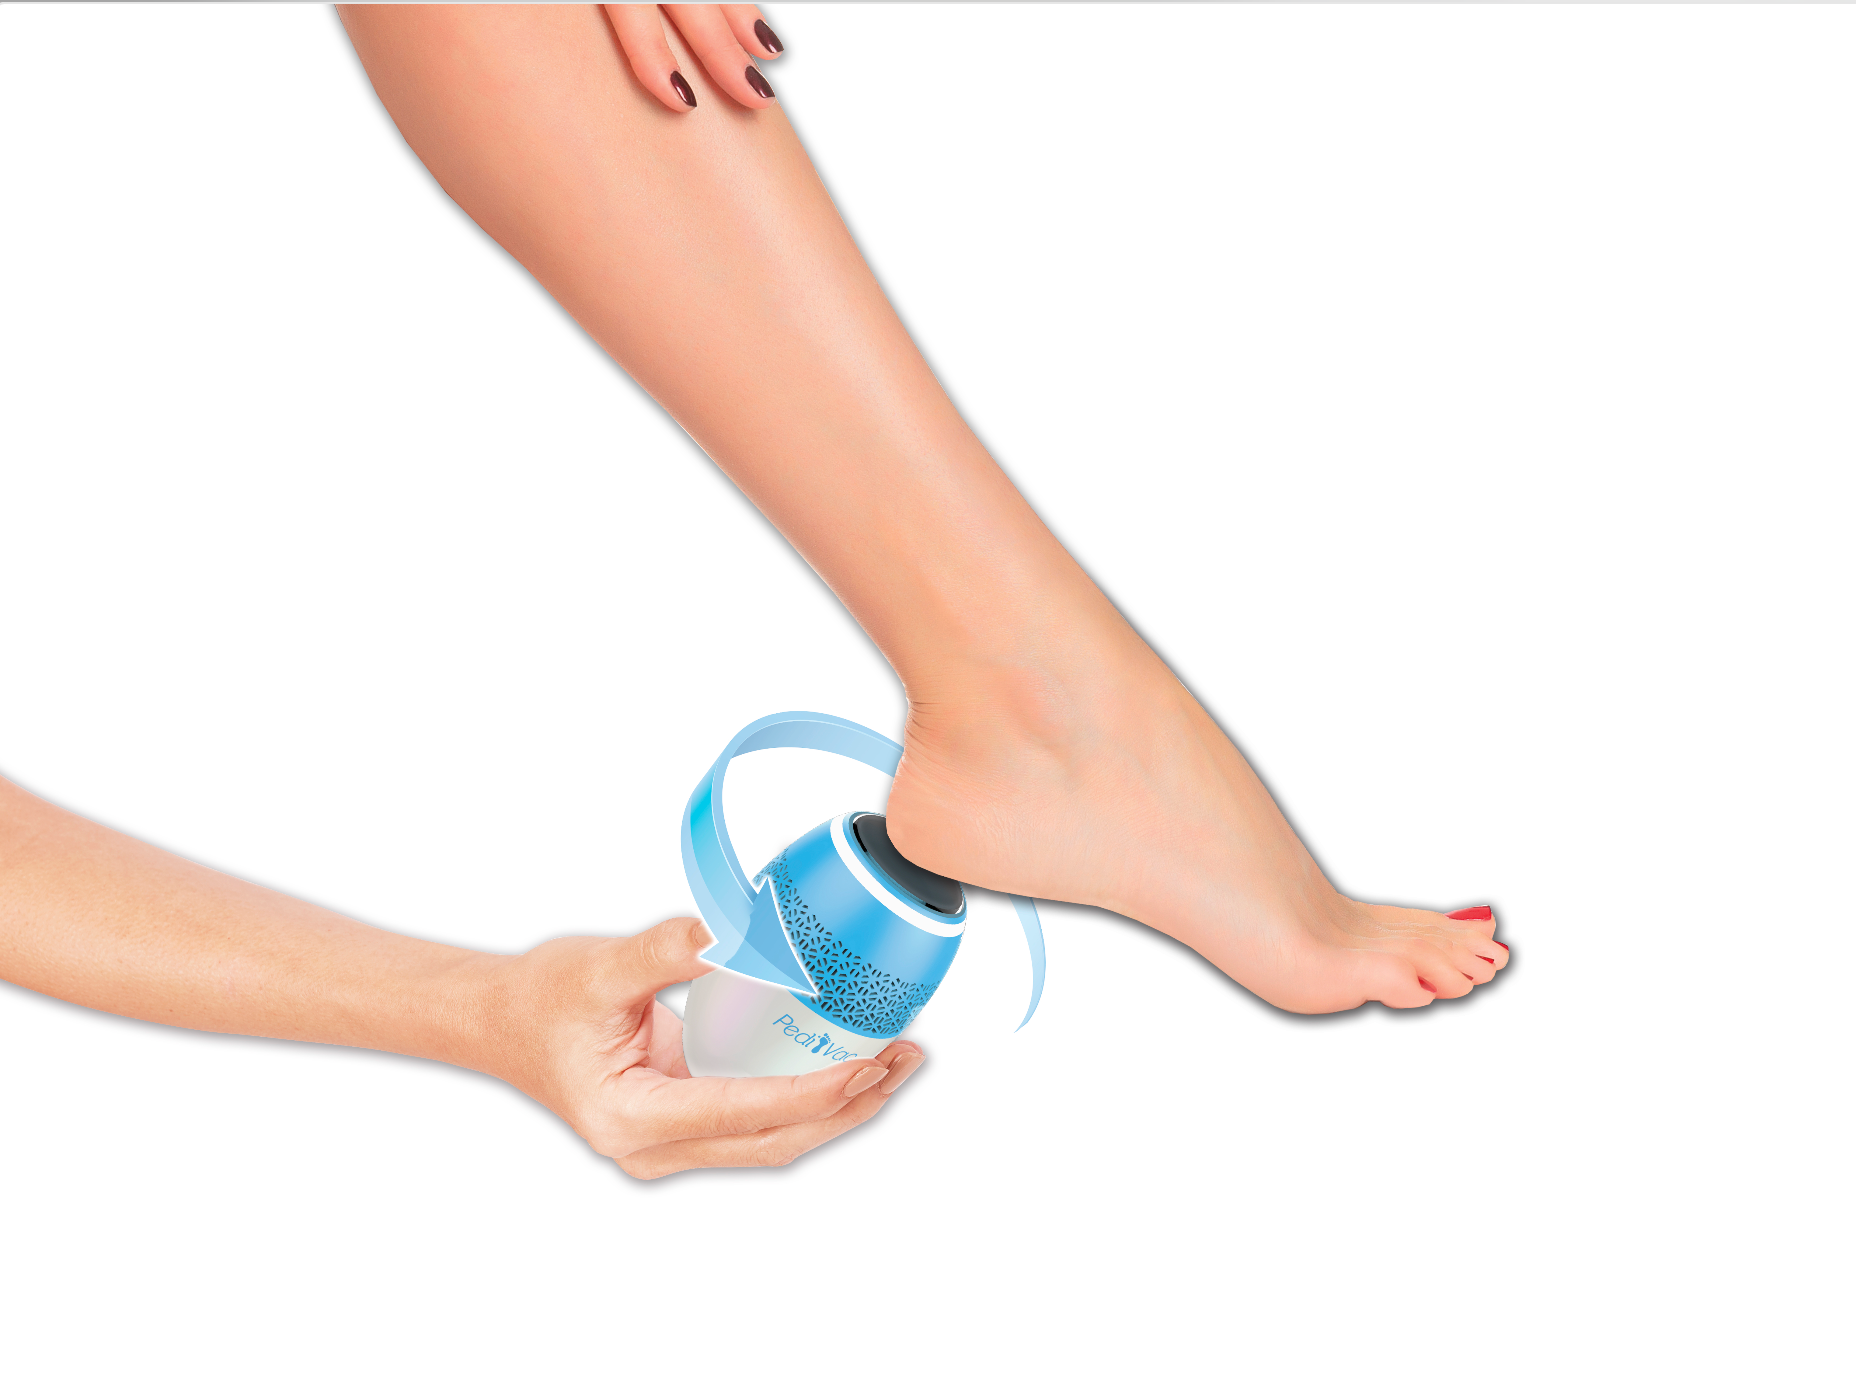 Pedi VAC Callus Remover for Feet with Built-in Vacuum Remove Dead Skin from Feet